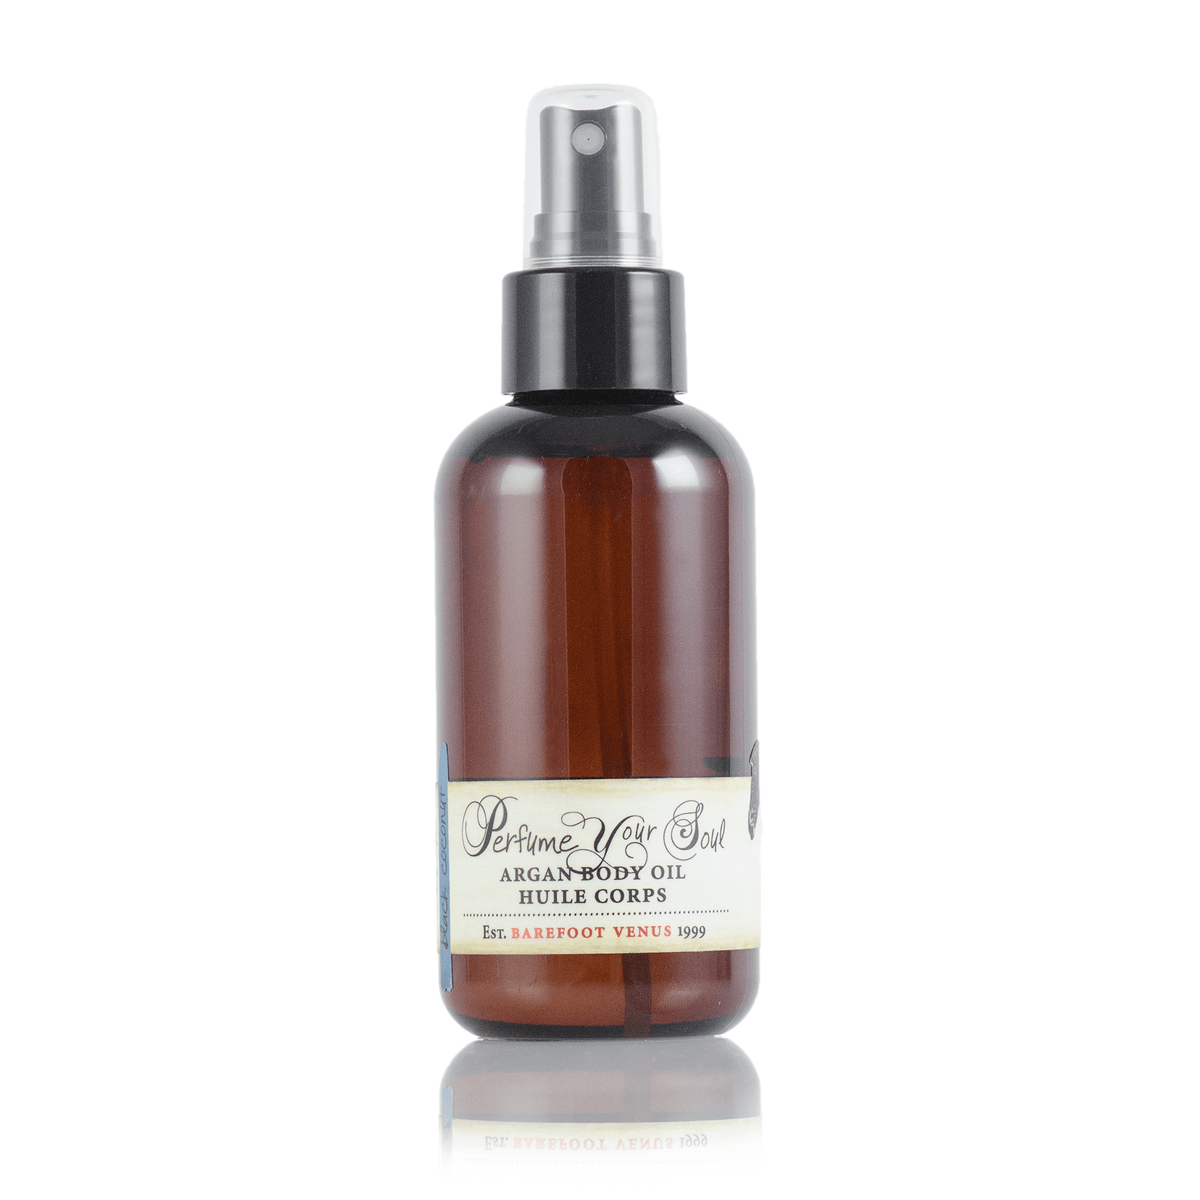 Black Coconut Argan Body Oil VISIBLY SMOOTHER, MORE HYDRATED SKIN. Barefoot Venus